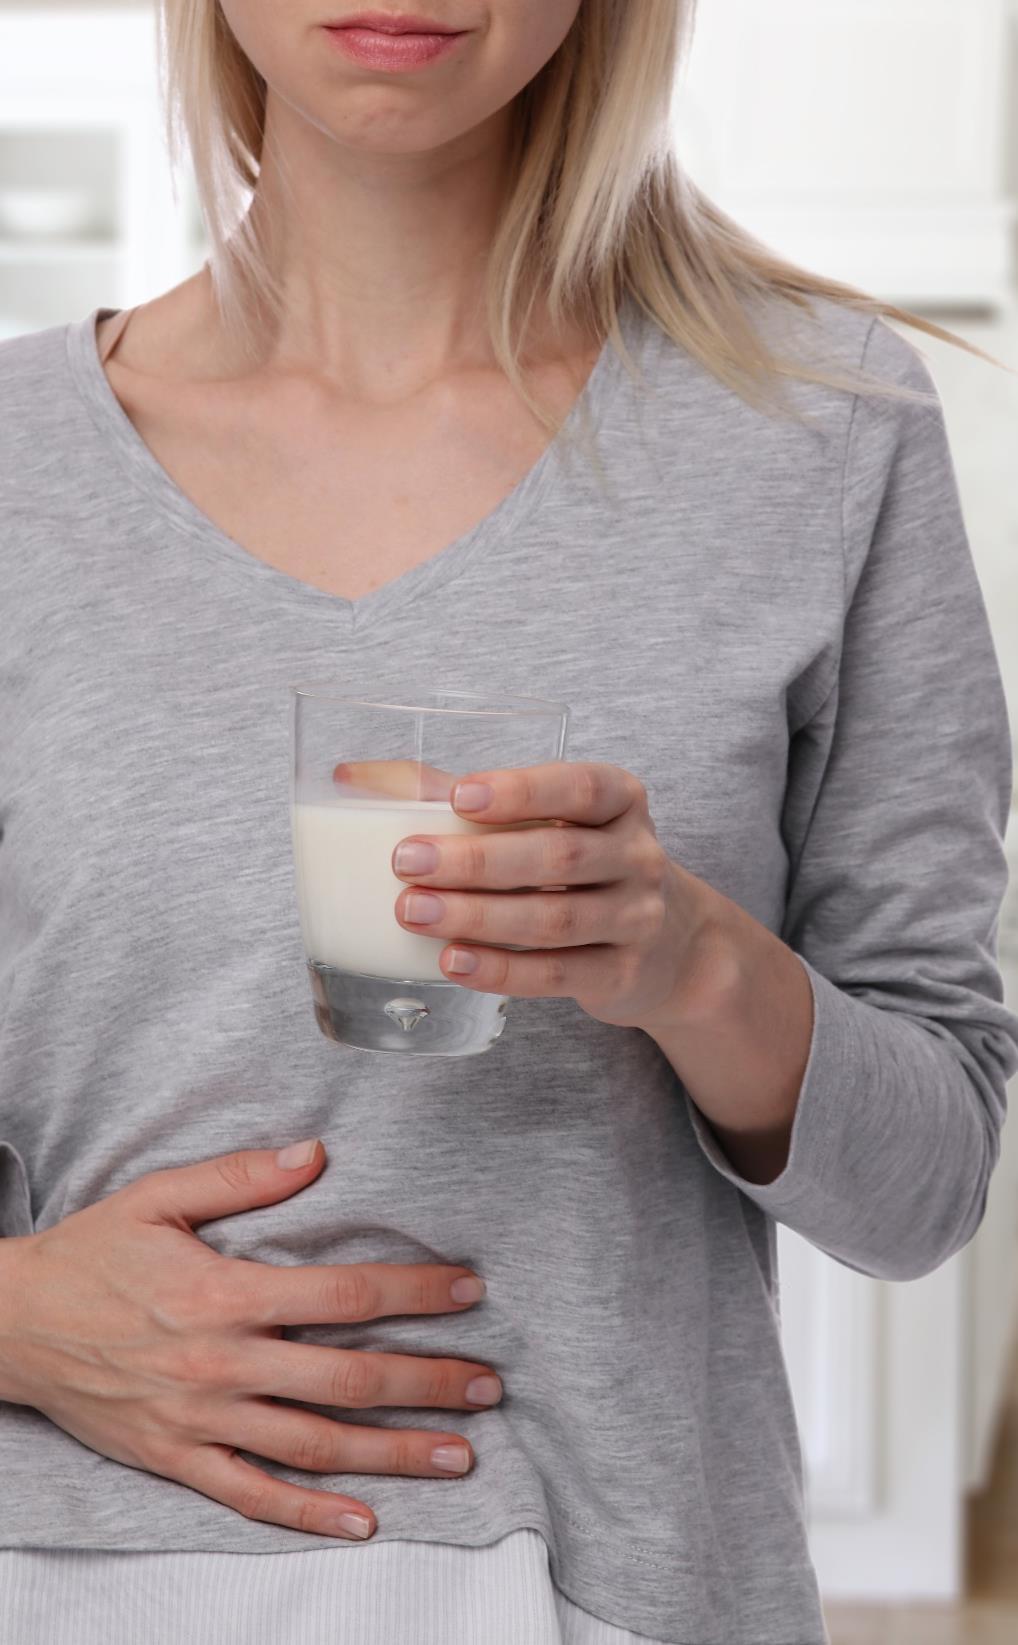 Lactose Intolerance Feel unwell 30mins to 2 hours after eating a lactose containing food.